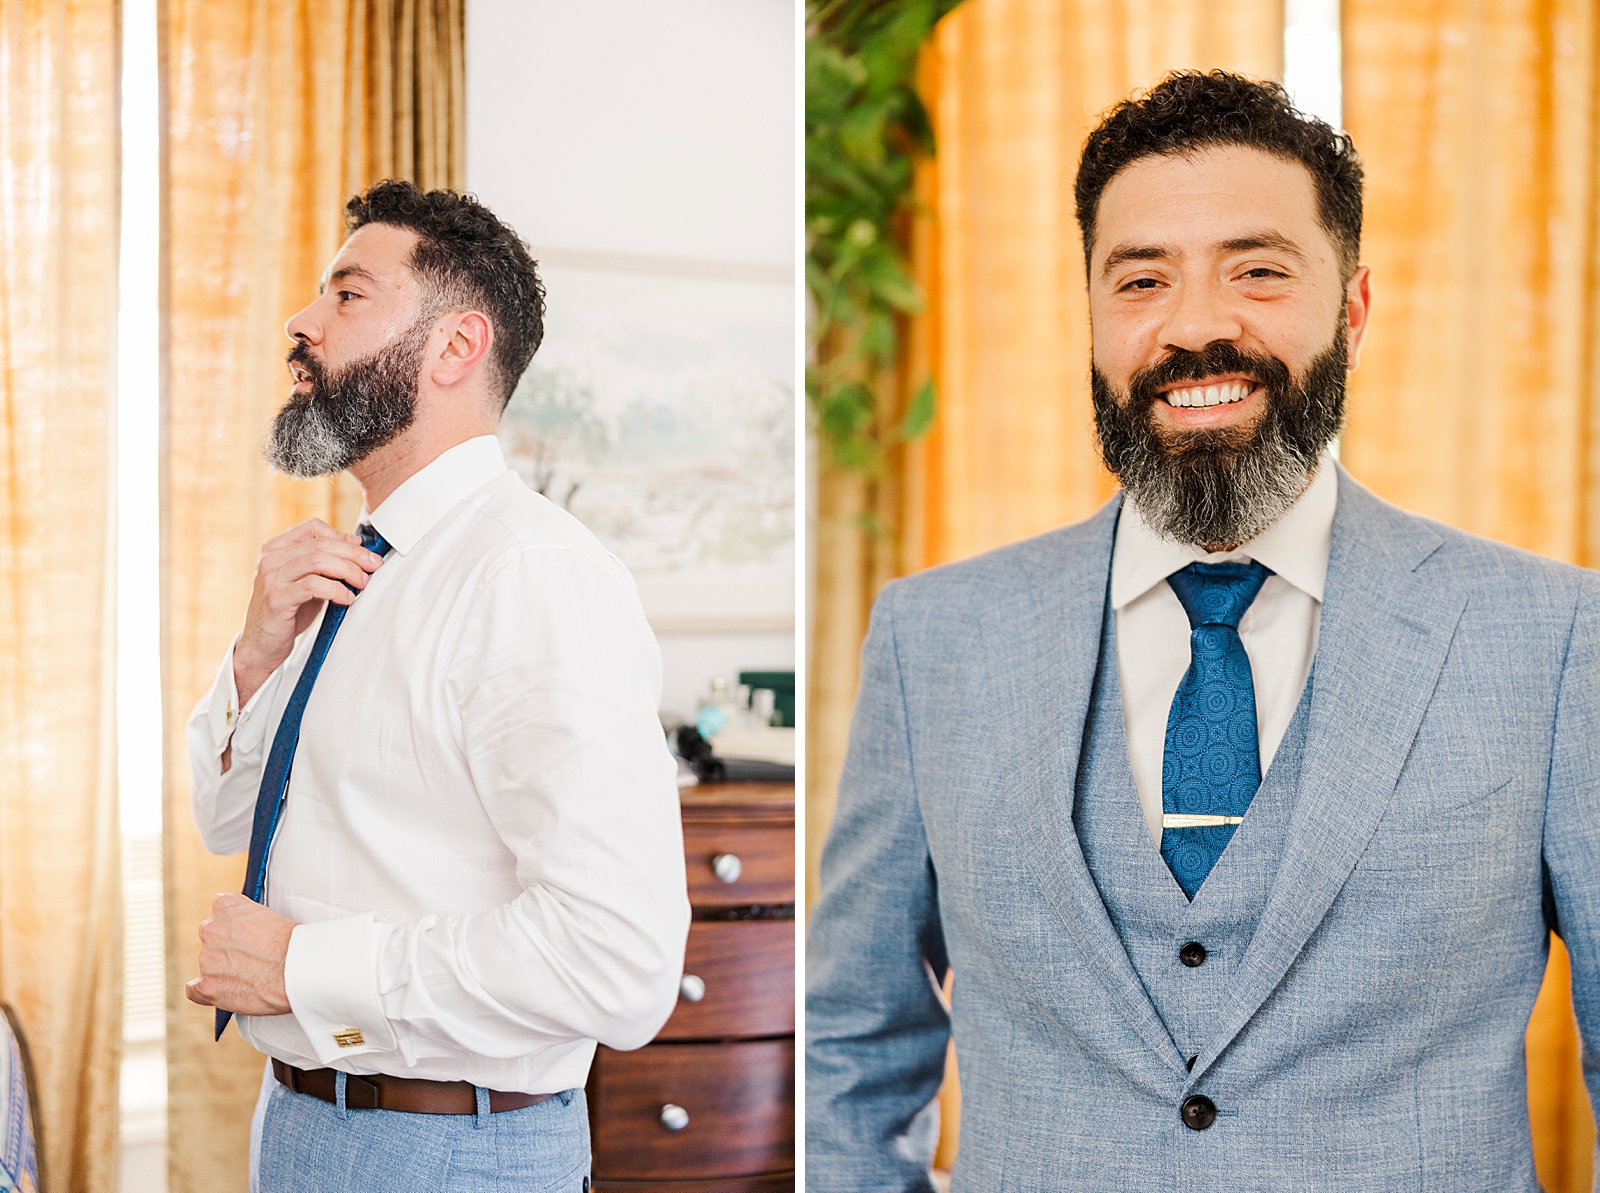 Left: Profile shot of Eliseo adjusting his tie.
Right: Upper body shot of Eliseo smiling in his suit. 